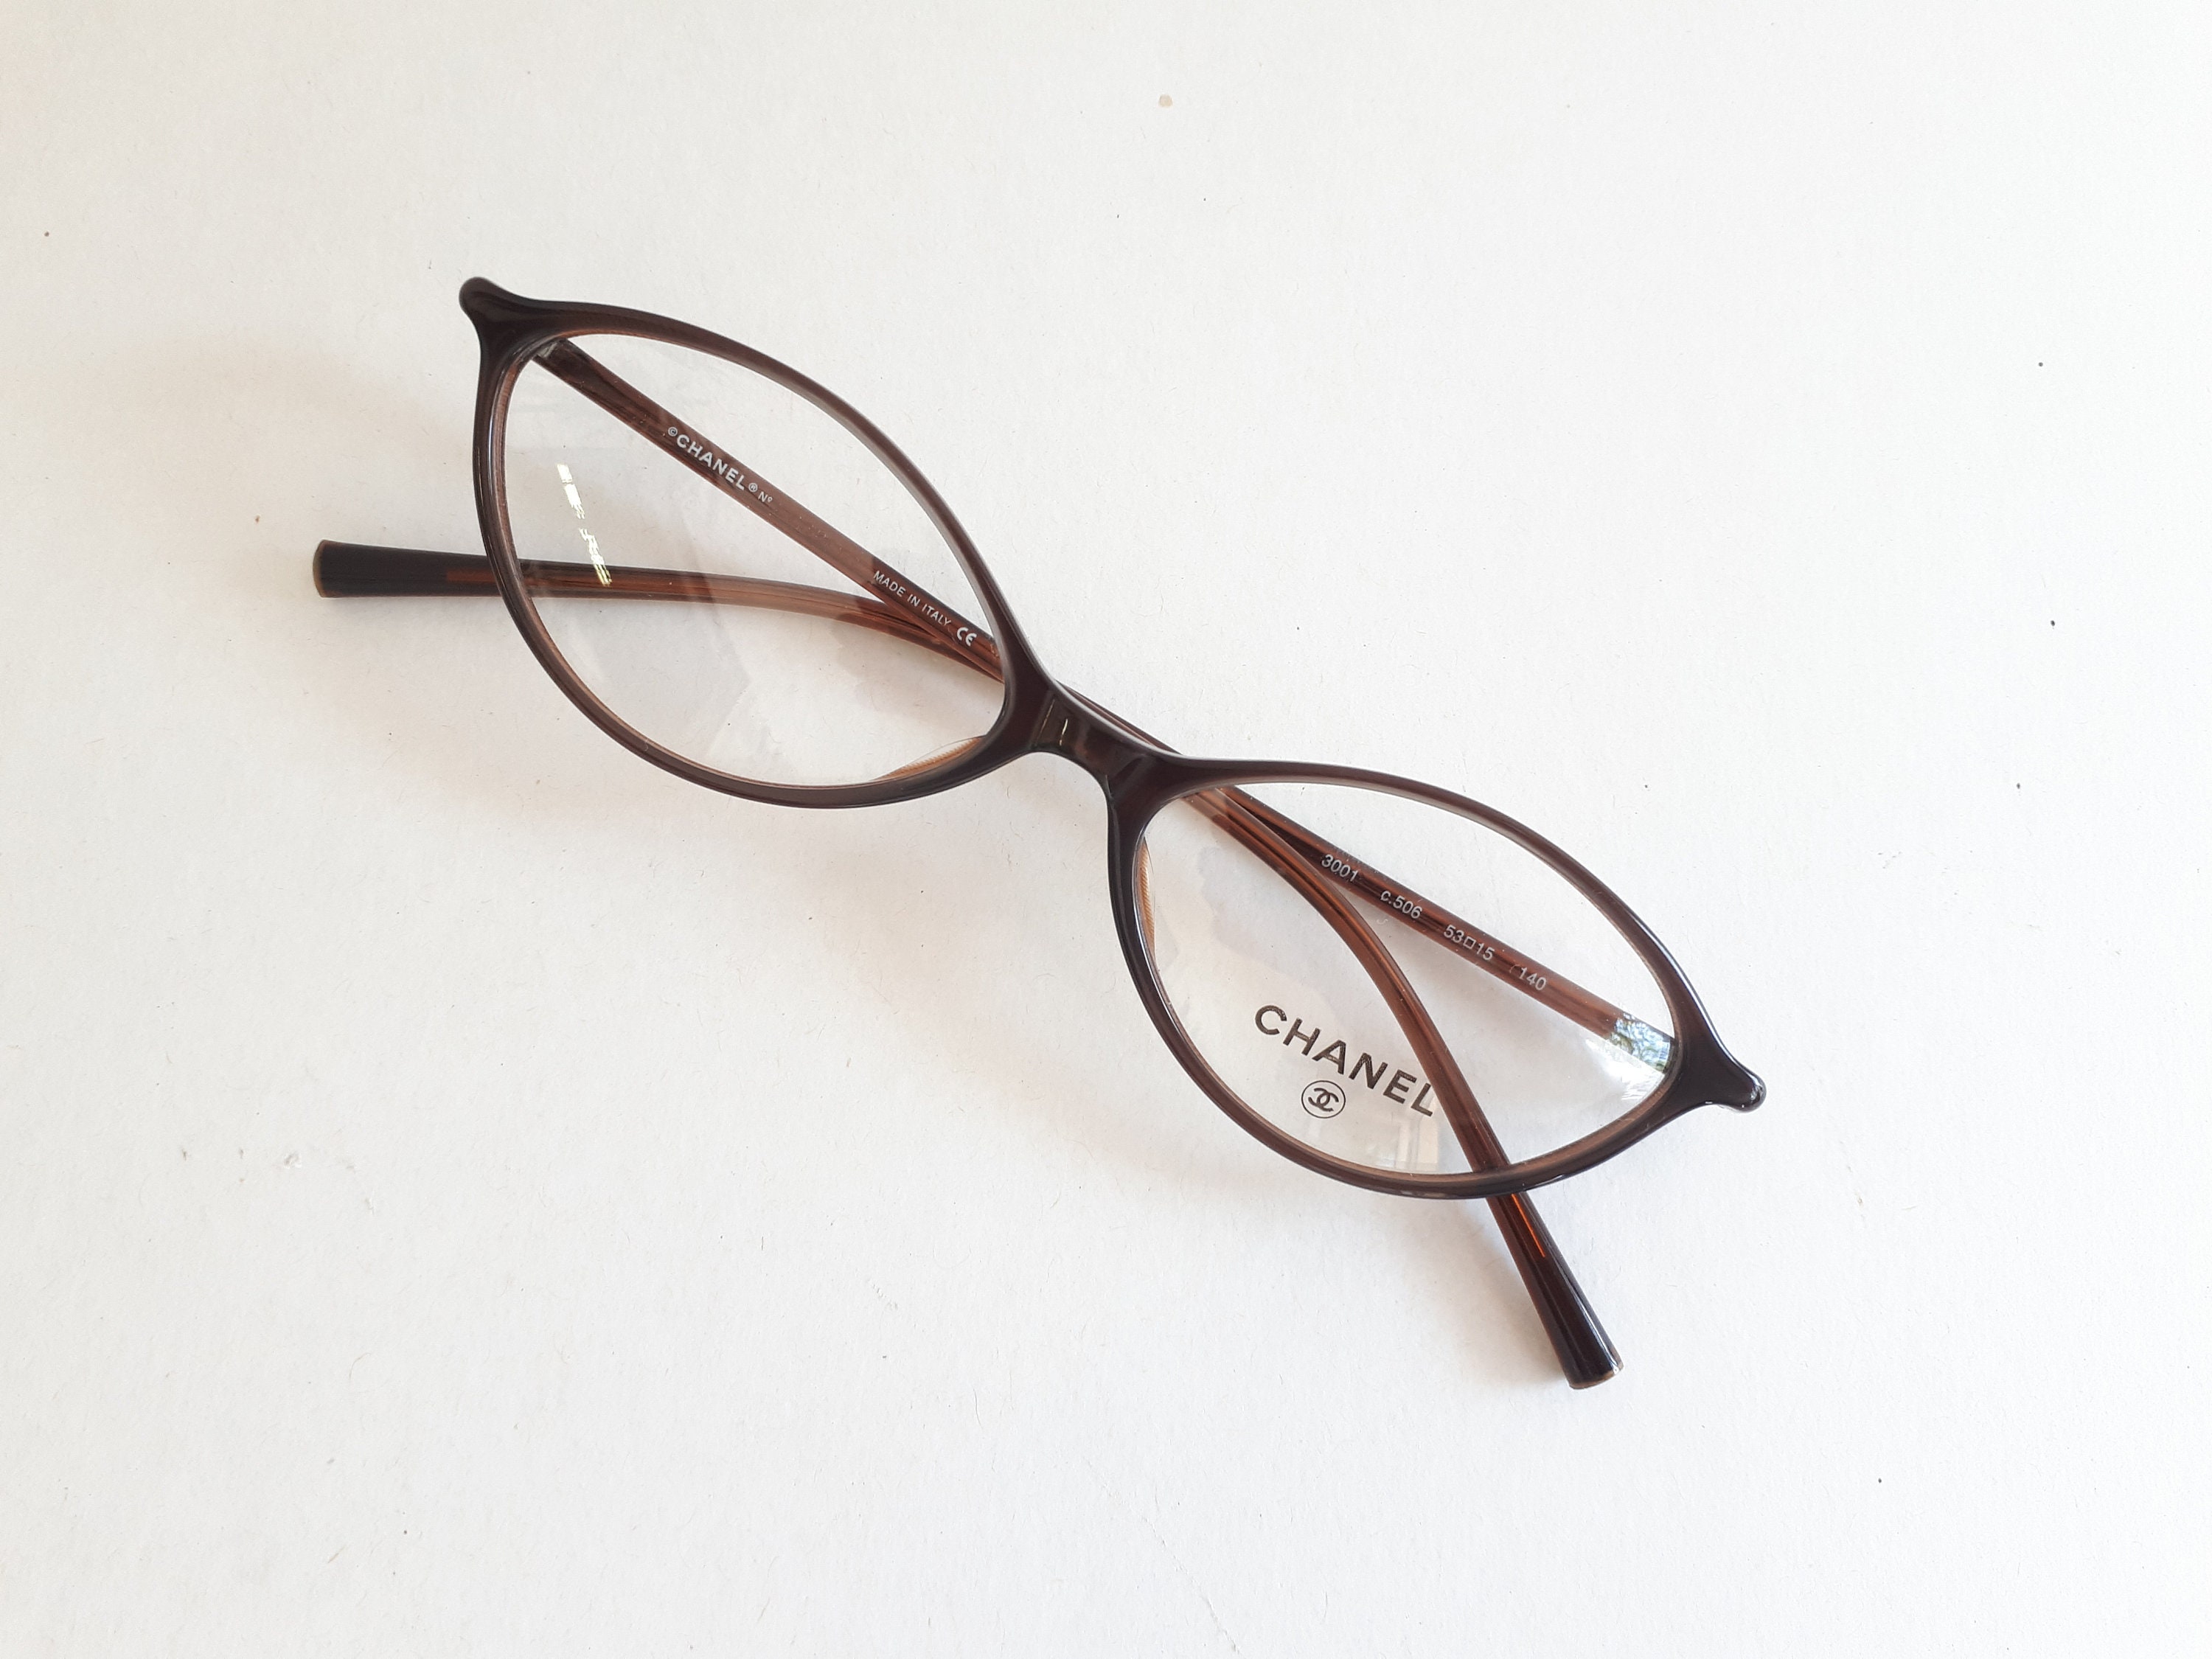 Chanel 3001 Eyeglasses Brown Colored Oval Shaped Women Glasses 